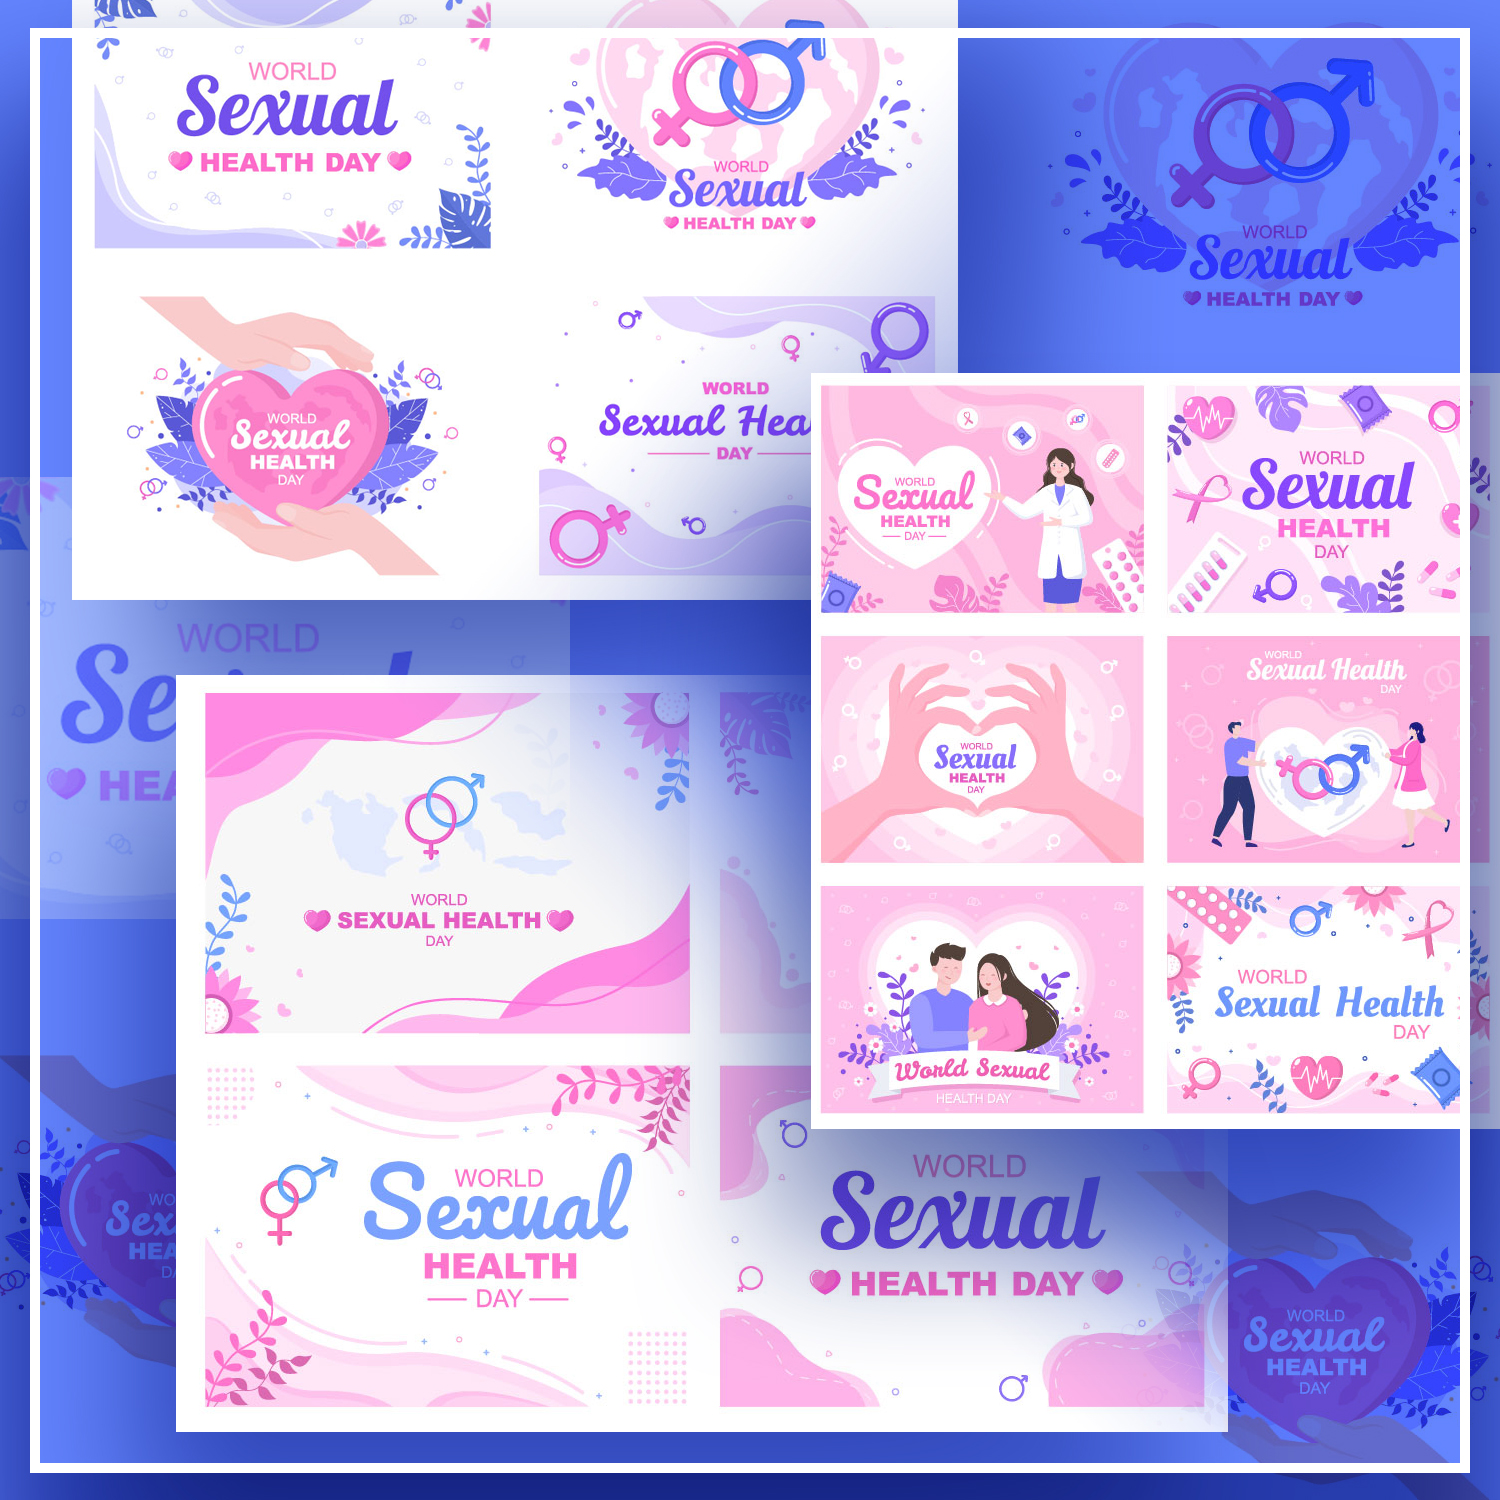 22 World Sexual Health Day Background Illustrations cover image.